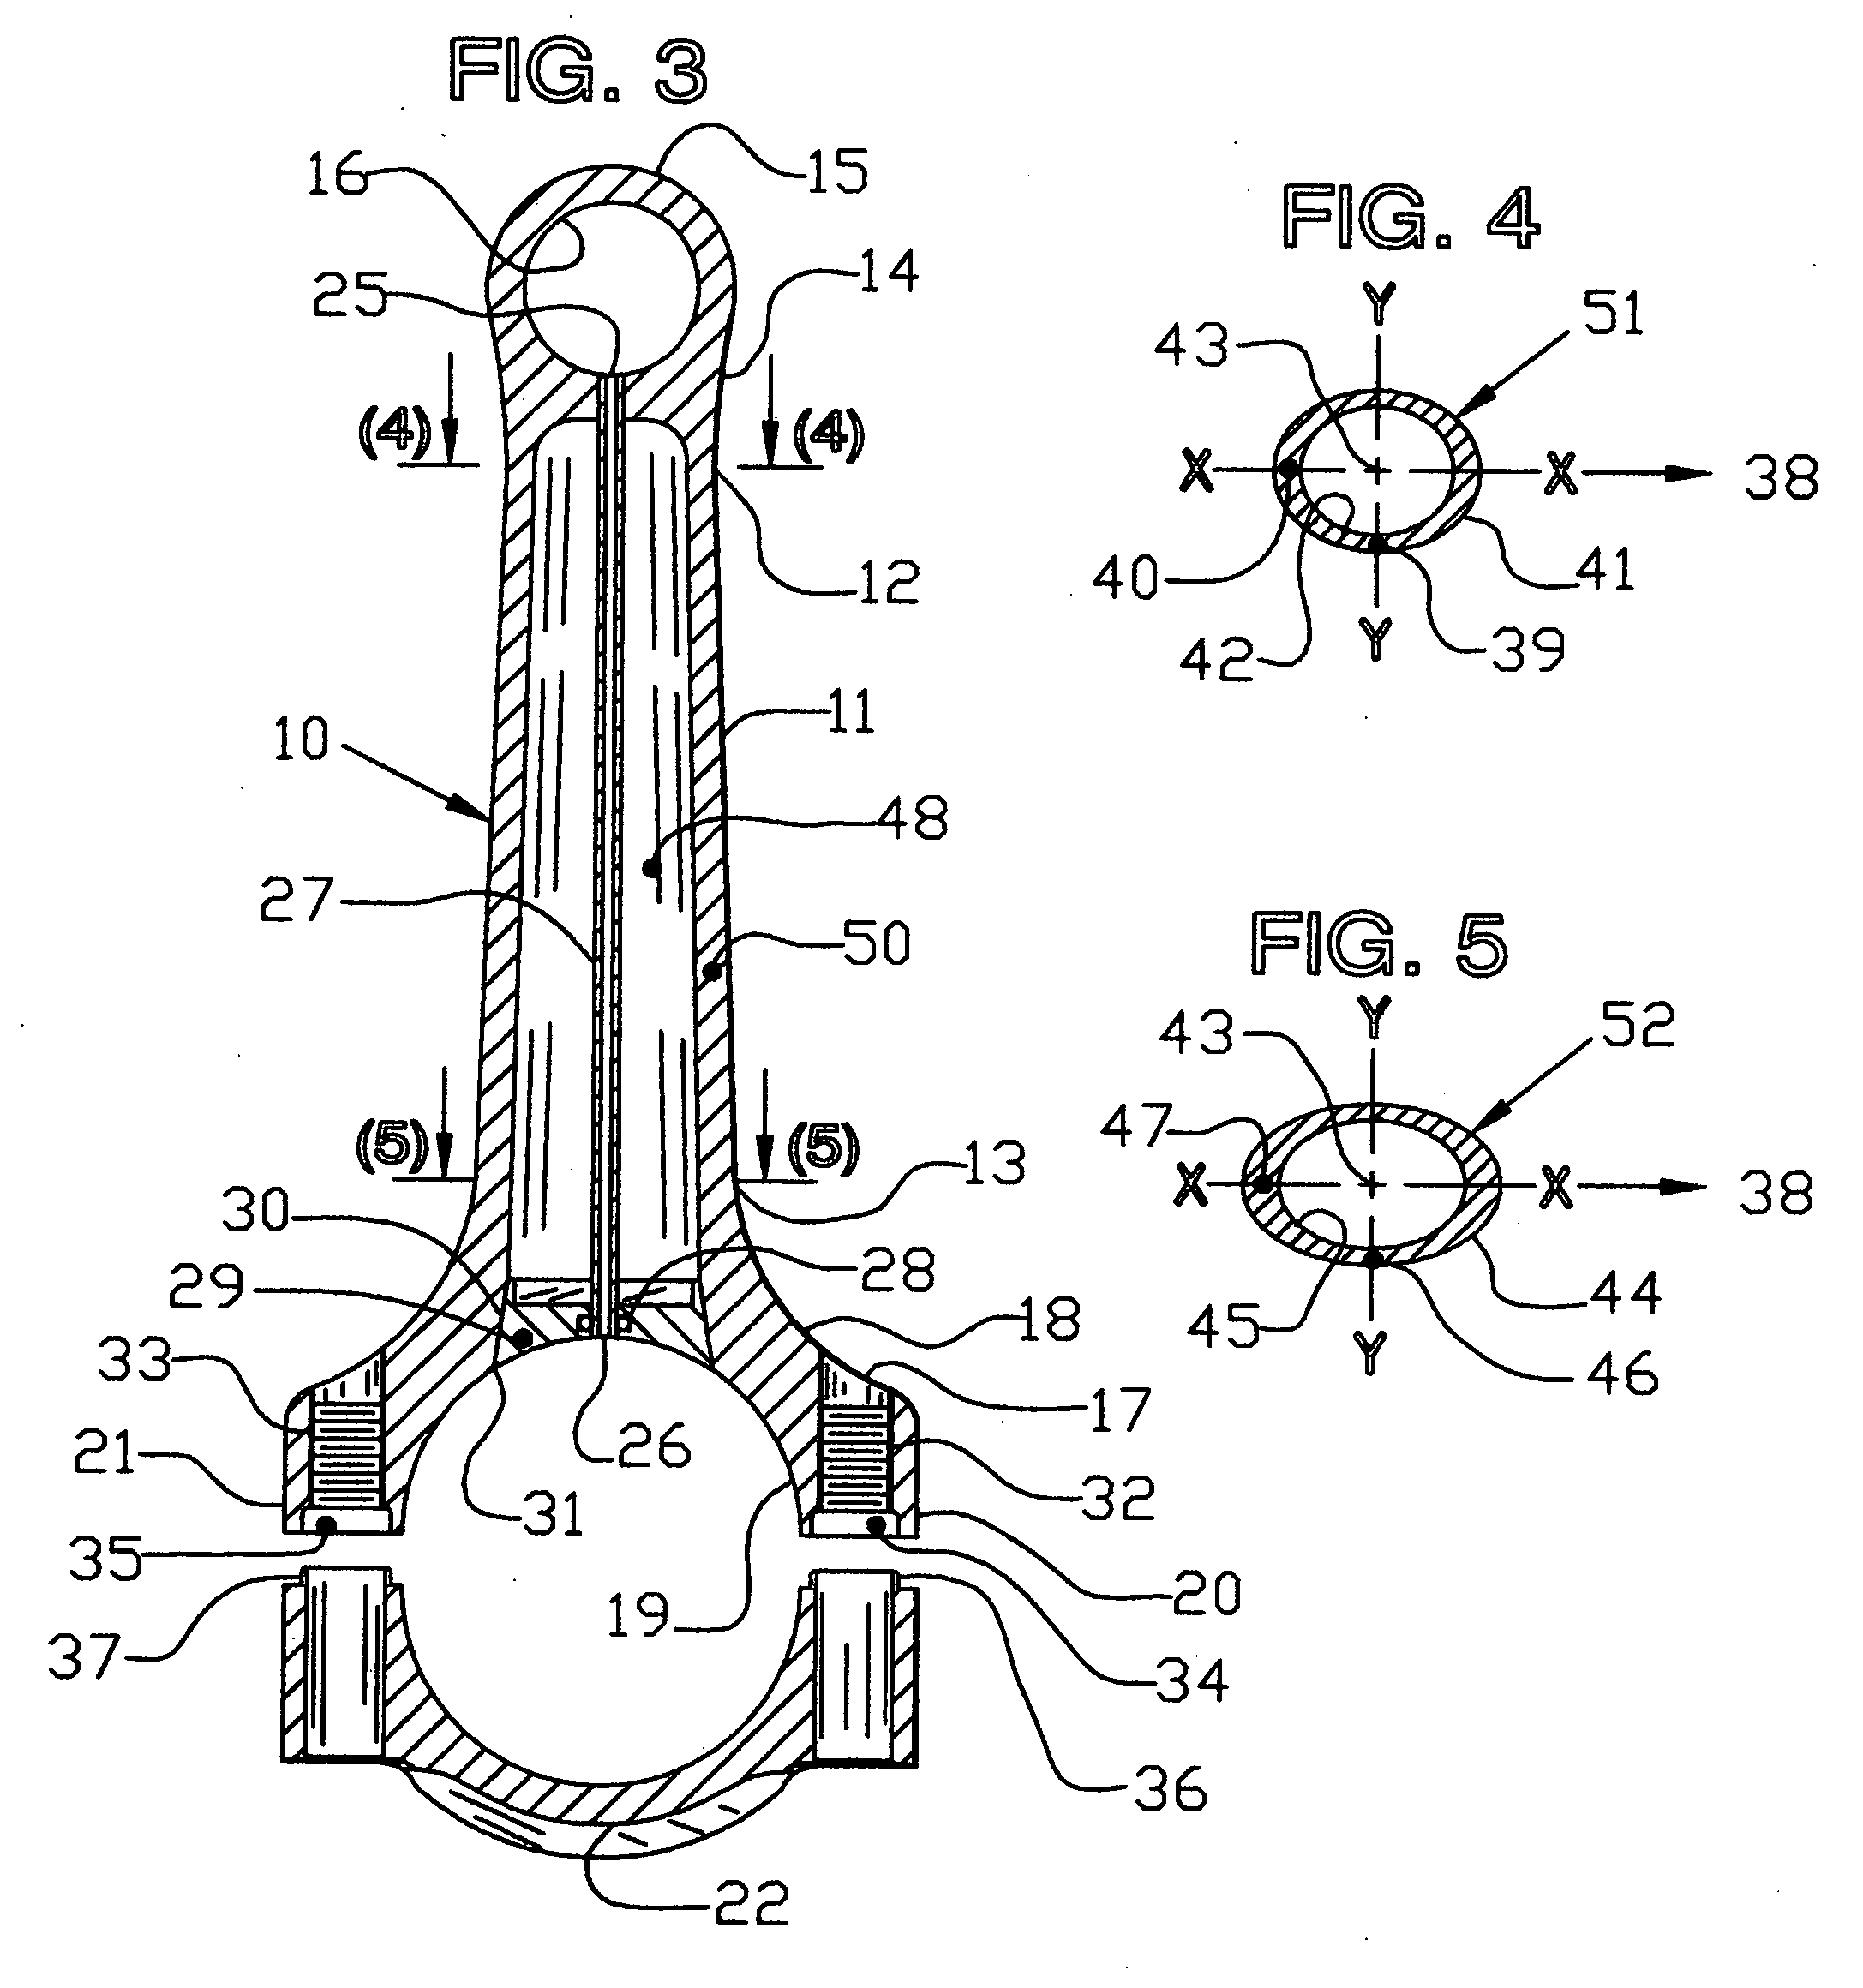 Engine connecting rod for high performance applications and method of manufacture